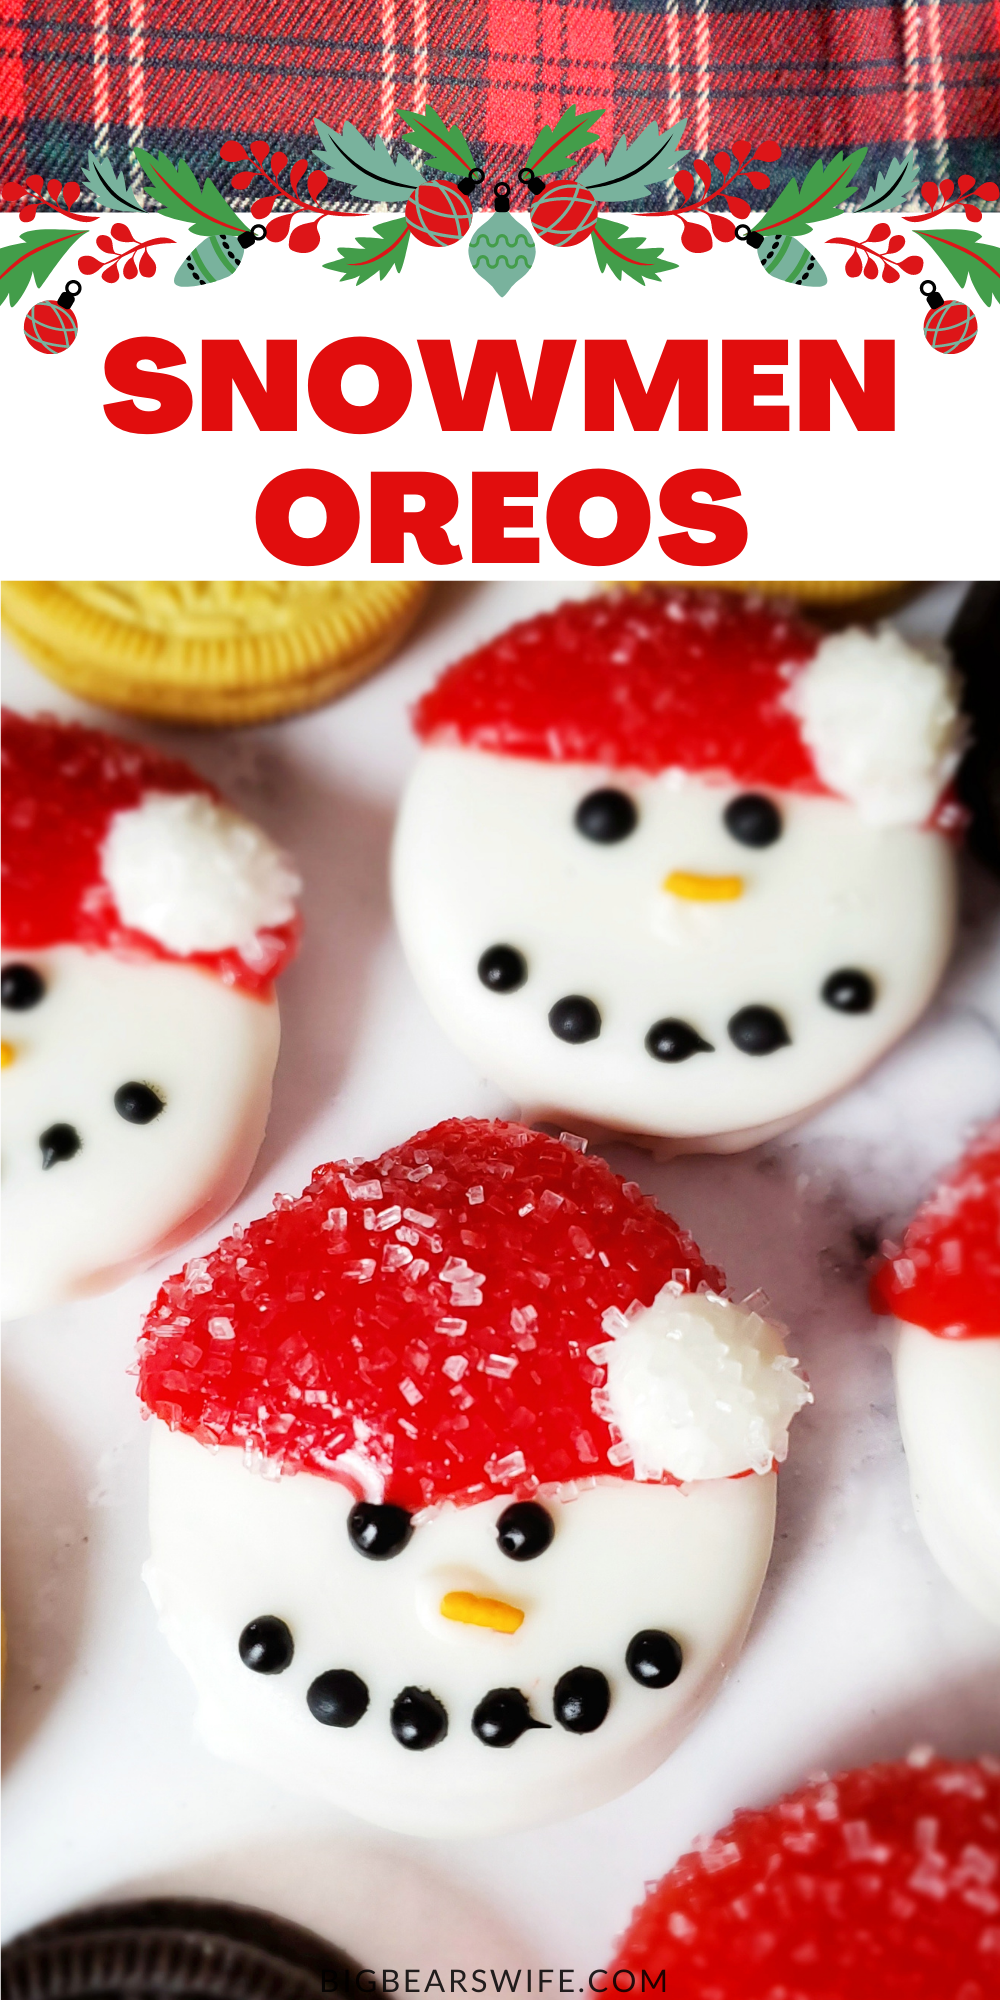  These Snowmen Oreos Cookies are so fun and easy to make! Great for cookie parties, cookie platters, nights with the kids and great to leave out for Santa!   via @bigbearswife